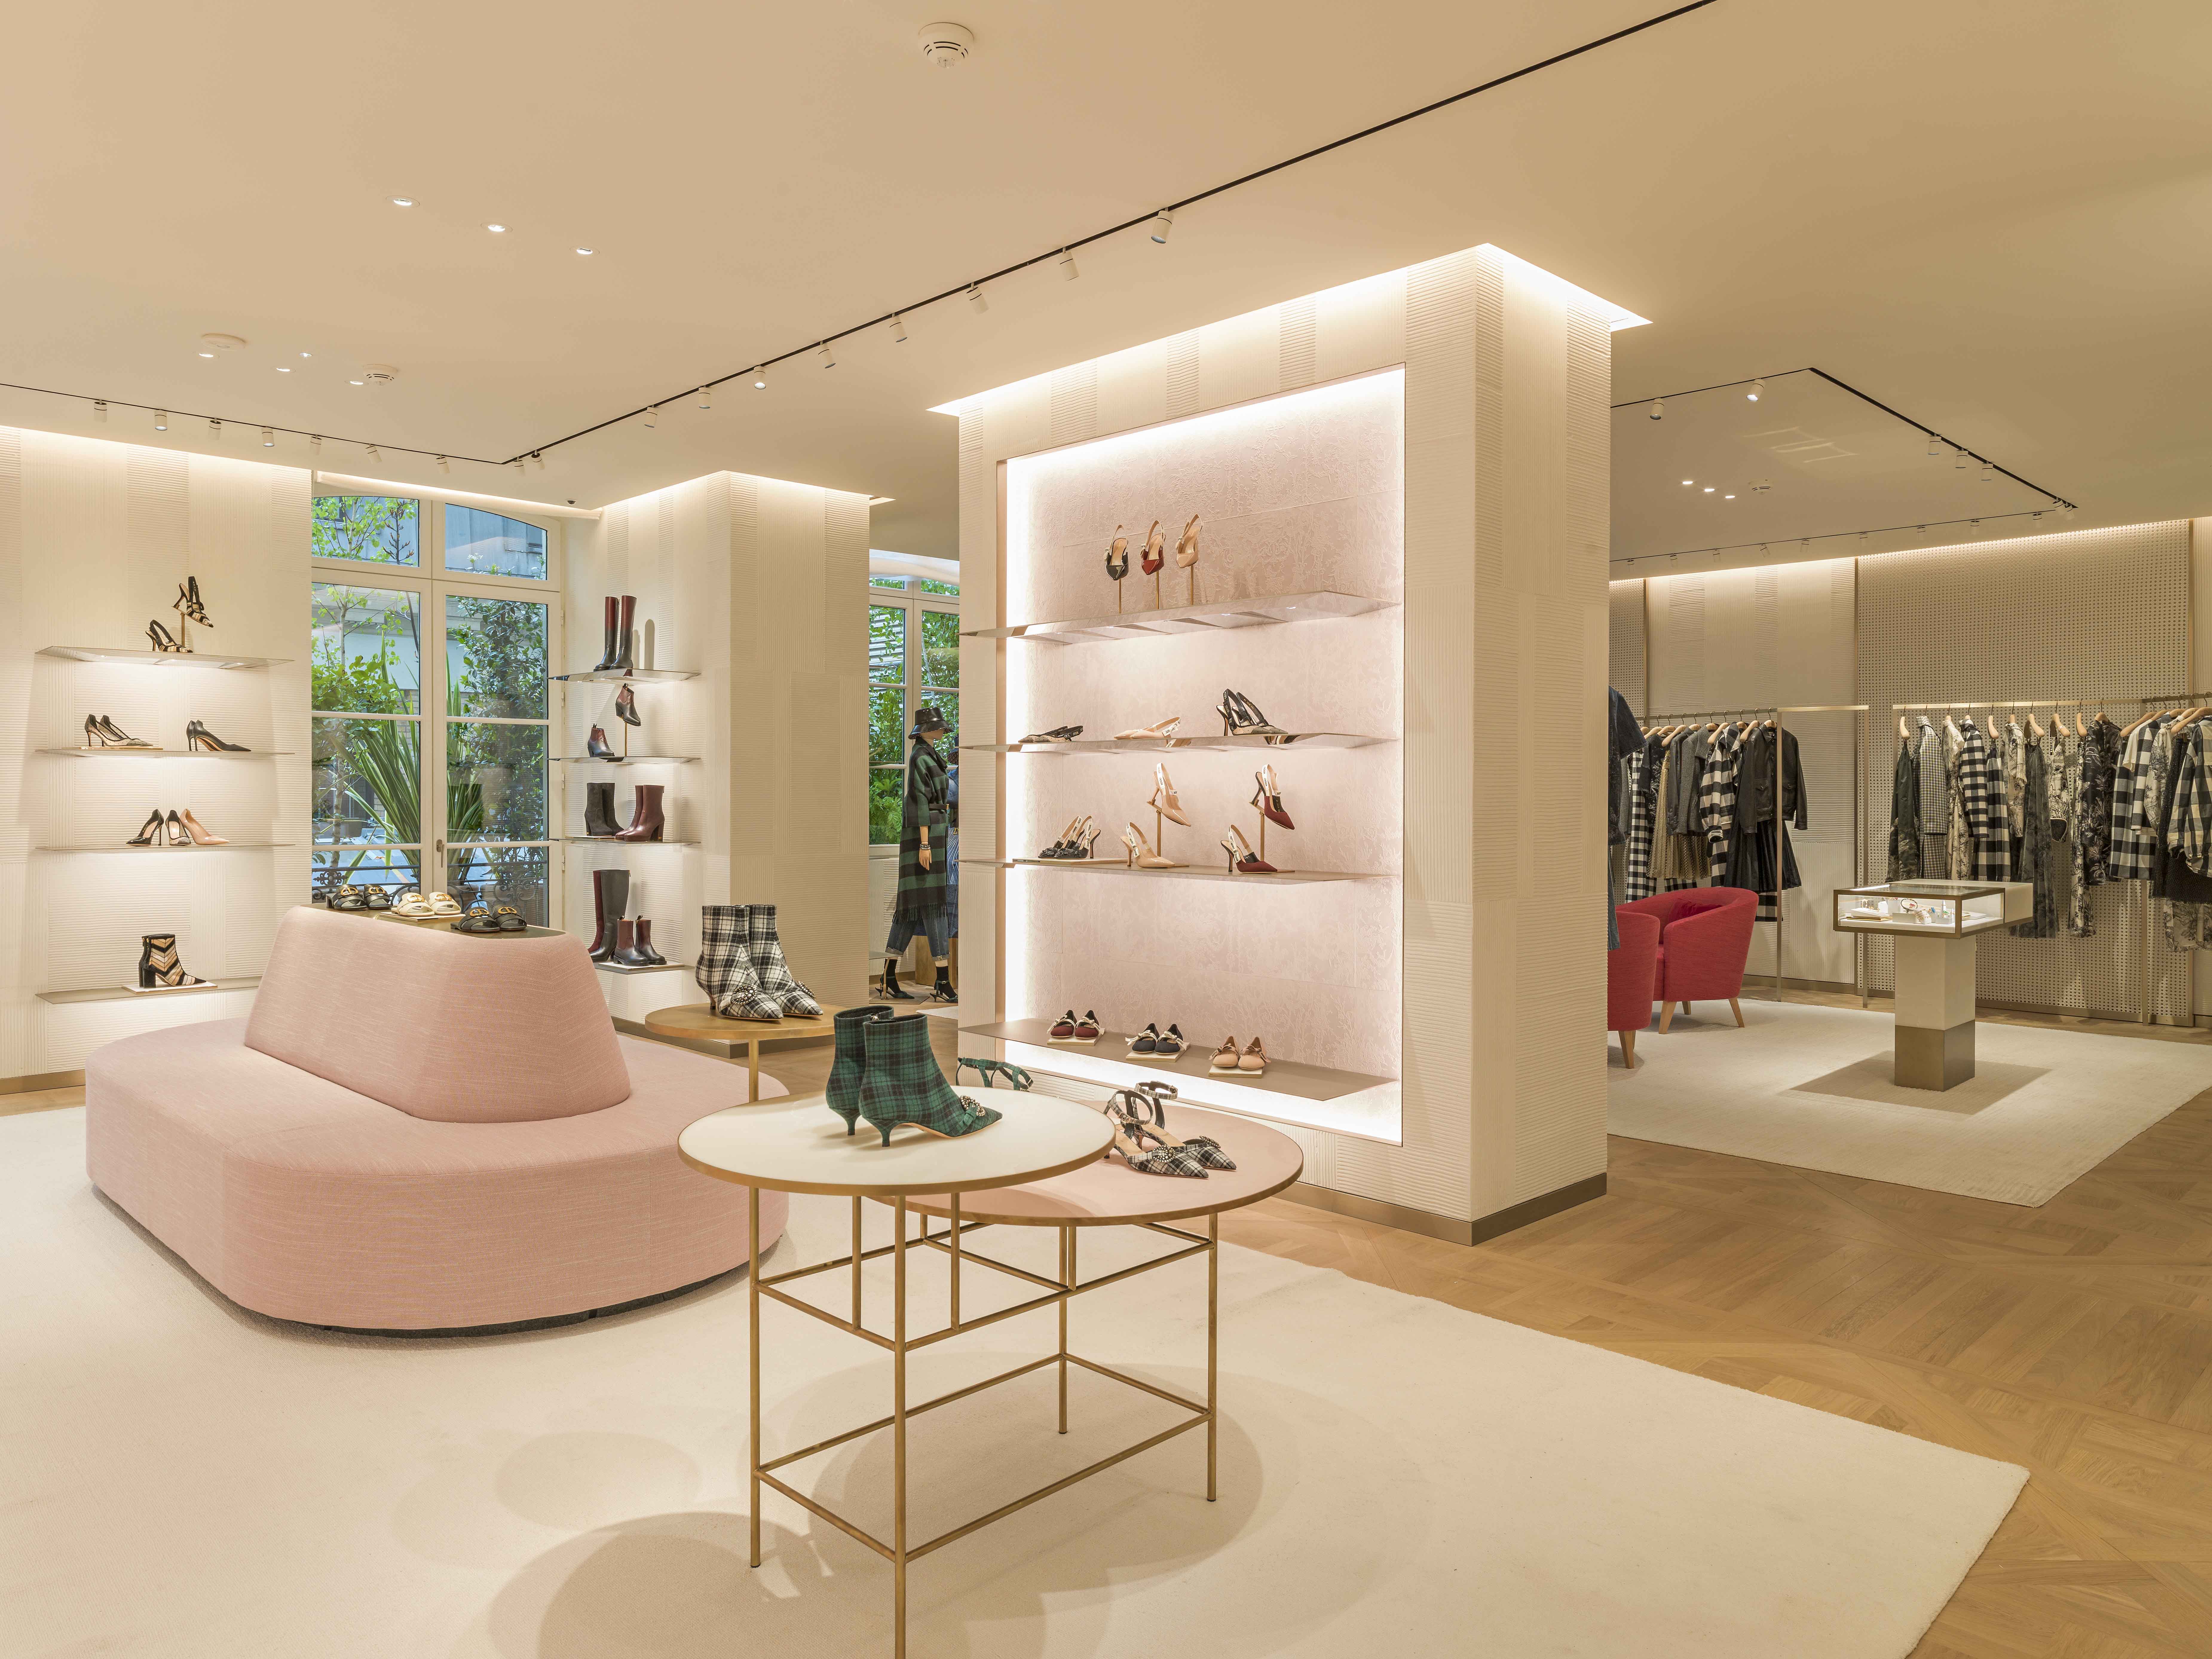 Dior has opened a new boutique on the Champs-Élysées